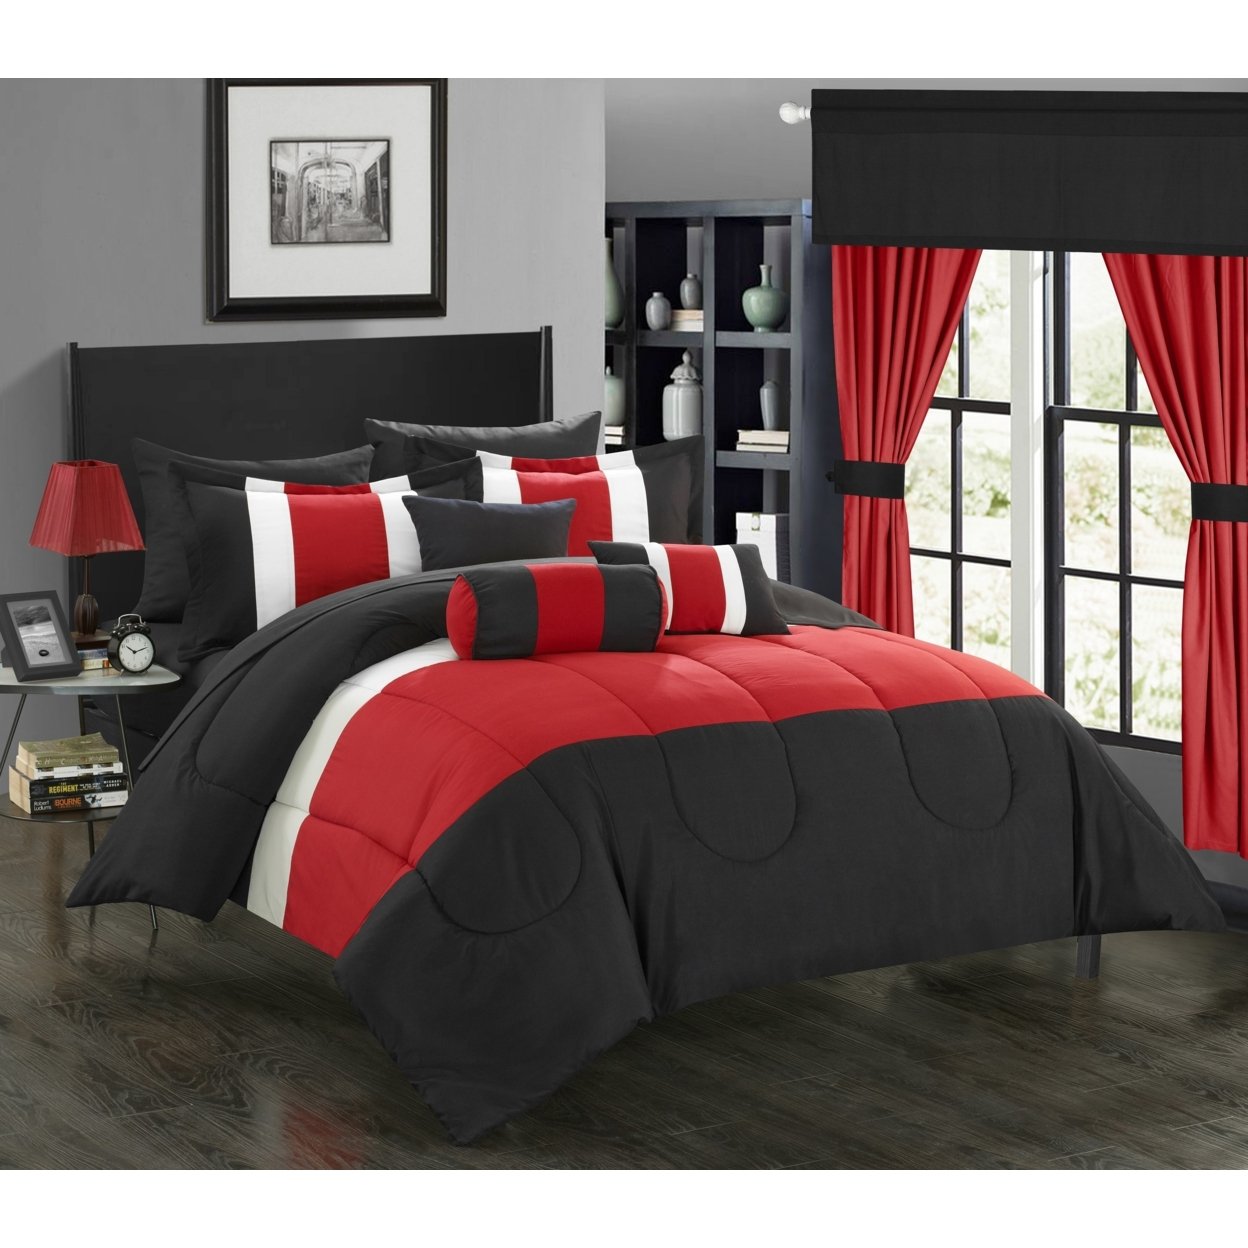 Chic Home 20 Piece Wanstead Complete Pieced Color Block Bedding, Sheets, Window Panel Collection Bed In A Bag Comforter Set - Red, Queen